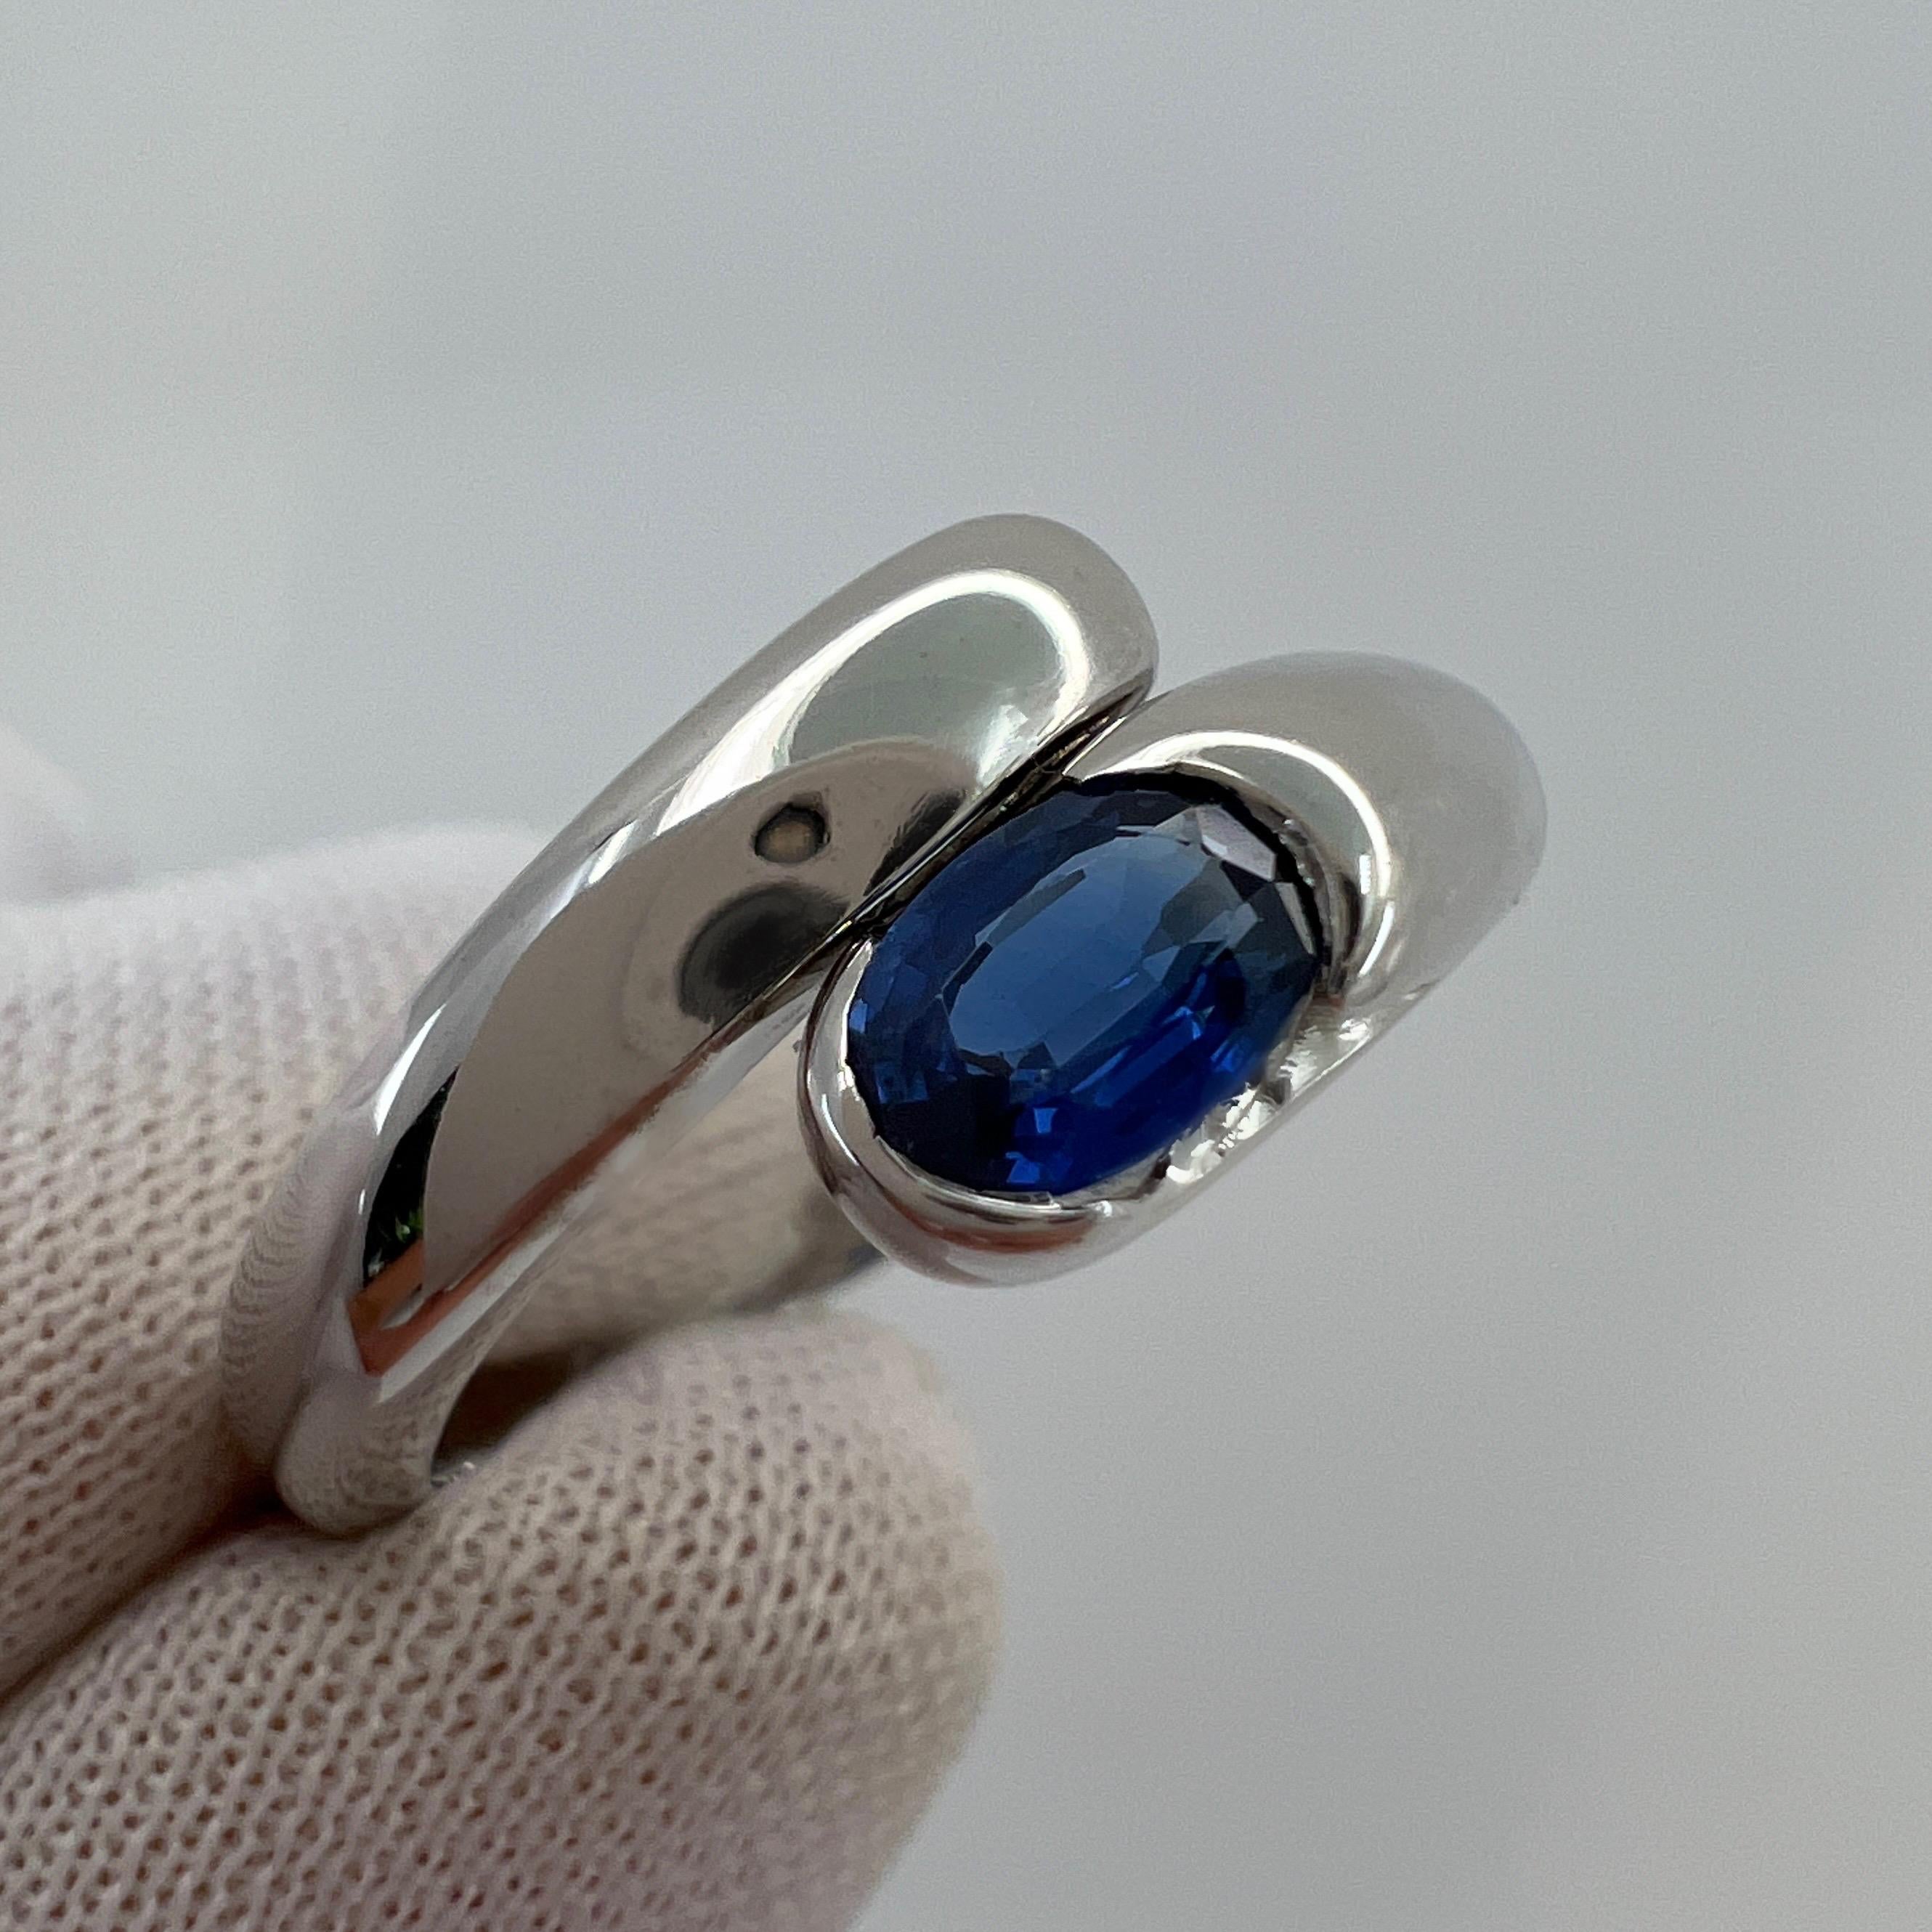 Vintage Bvlgari Astrea Vivid Blue Sapphire Oval Cut 18k White Gold Bypass Ring For Sale 2